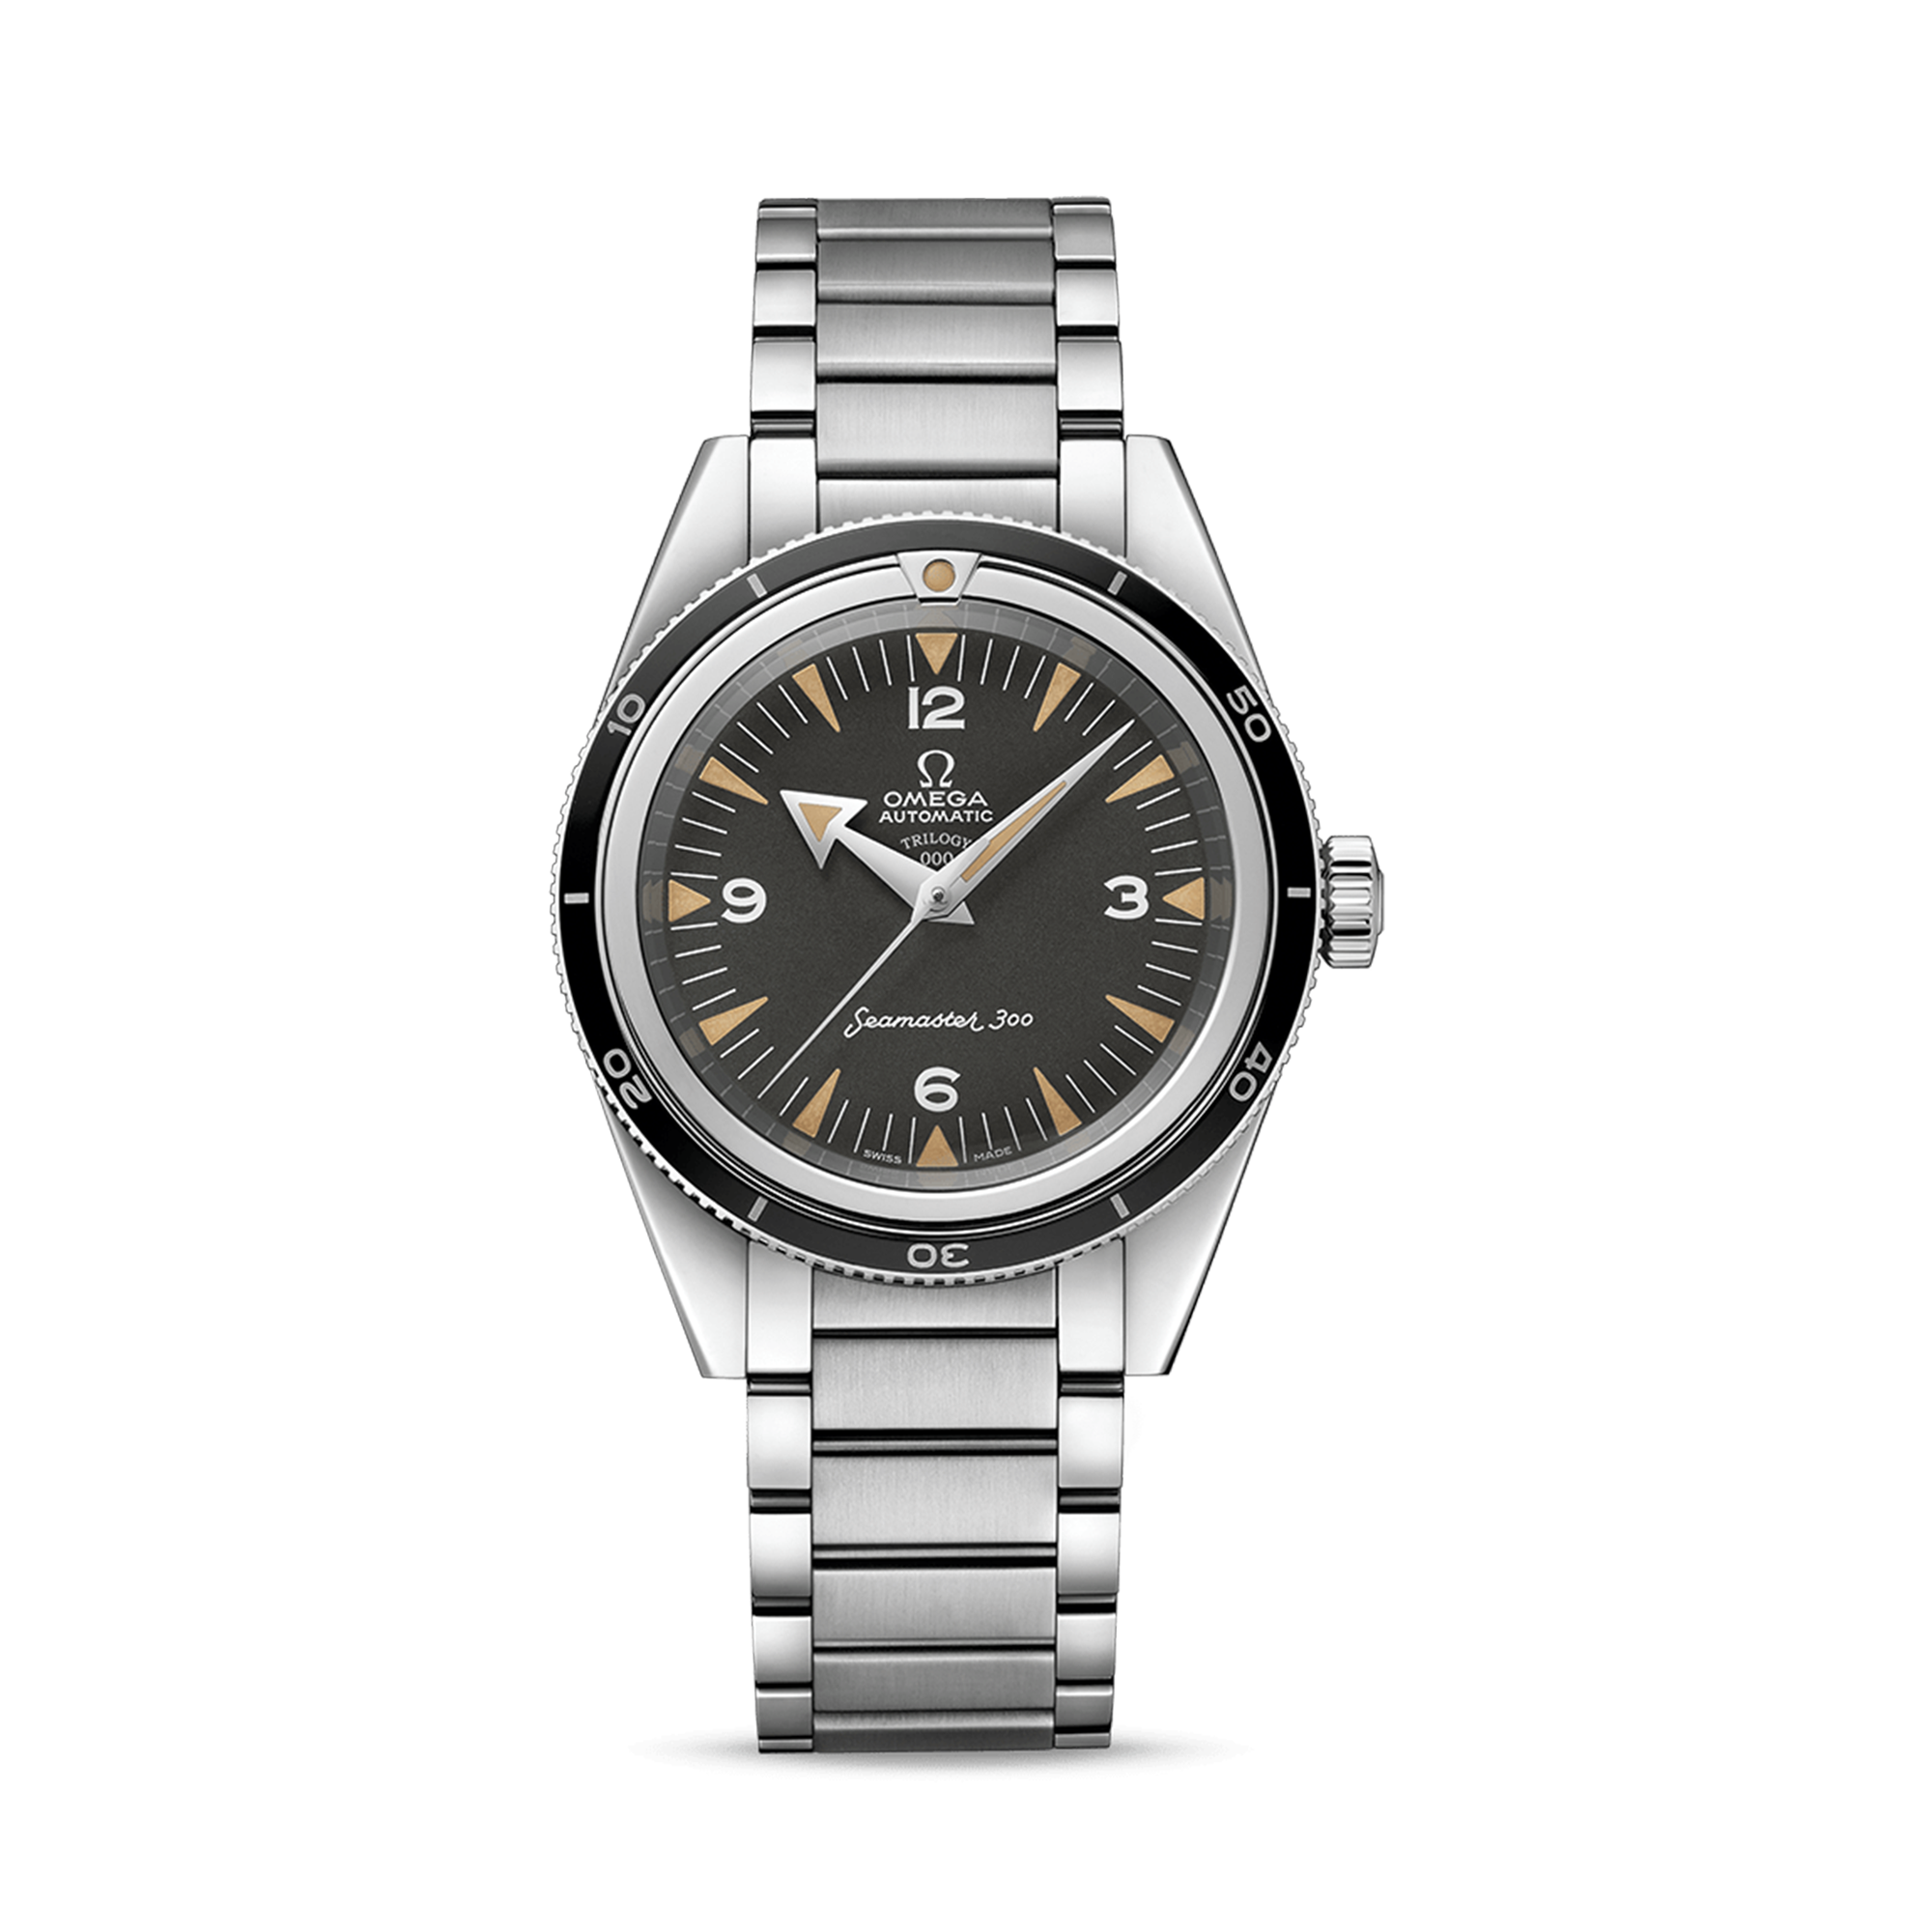 OMEGA Seamaster, The 1957 Trilogy, Trilogy Set Limited Edition 557 39mm, Black Dial, Arabic/Baton Numerals_1